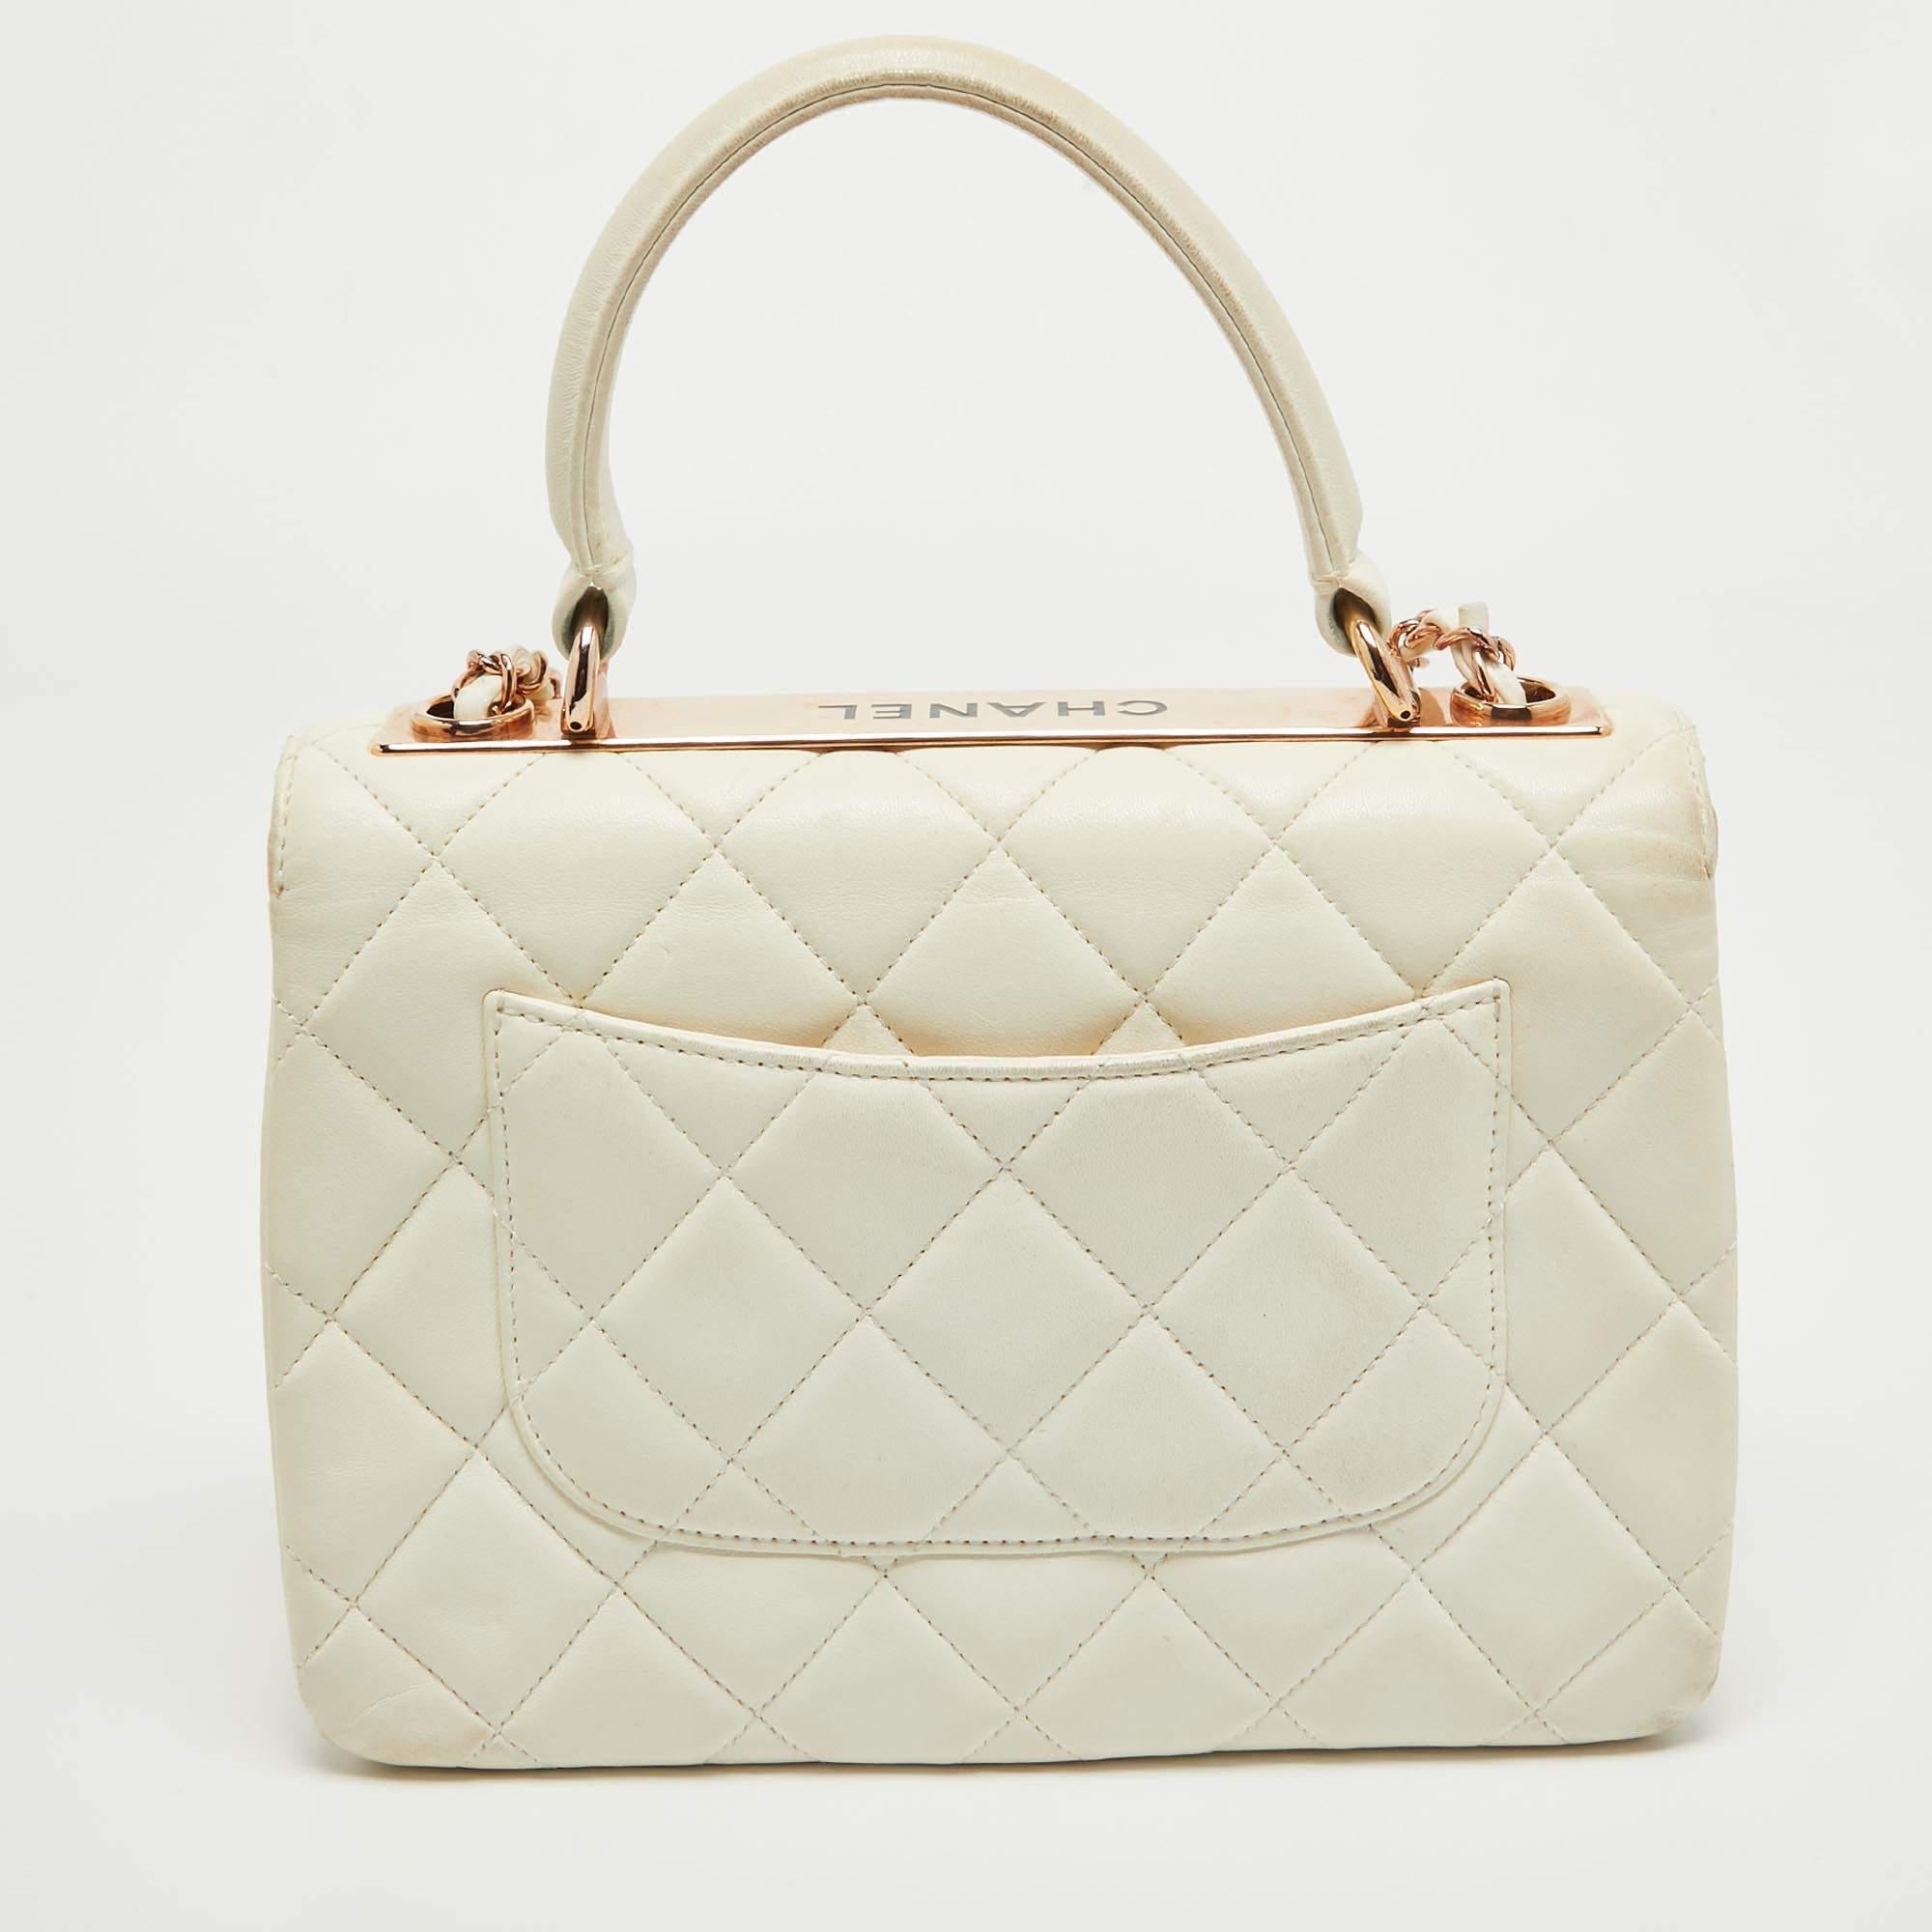  Chanel Off White Quilted Leather Small Trendy CC Flap Bag 16